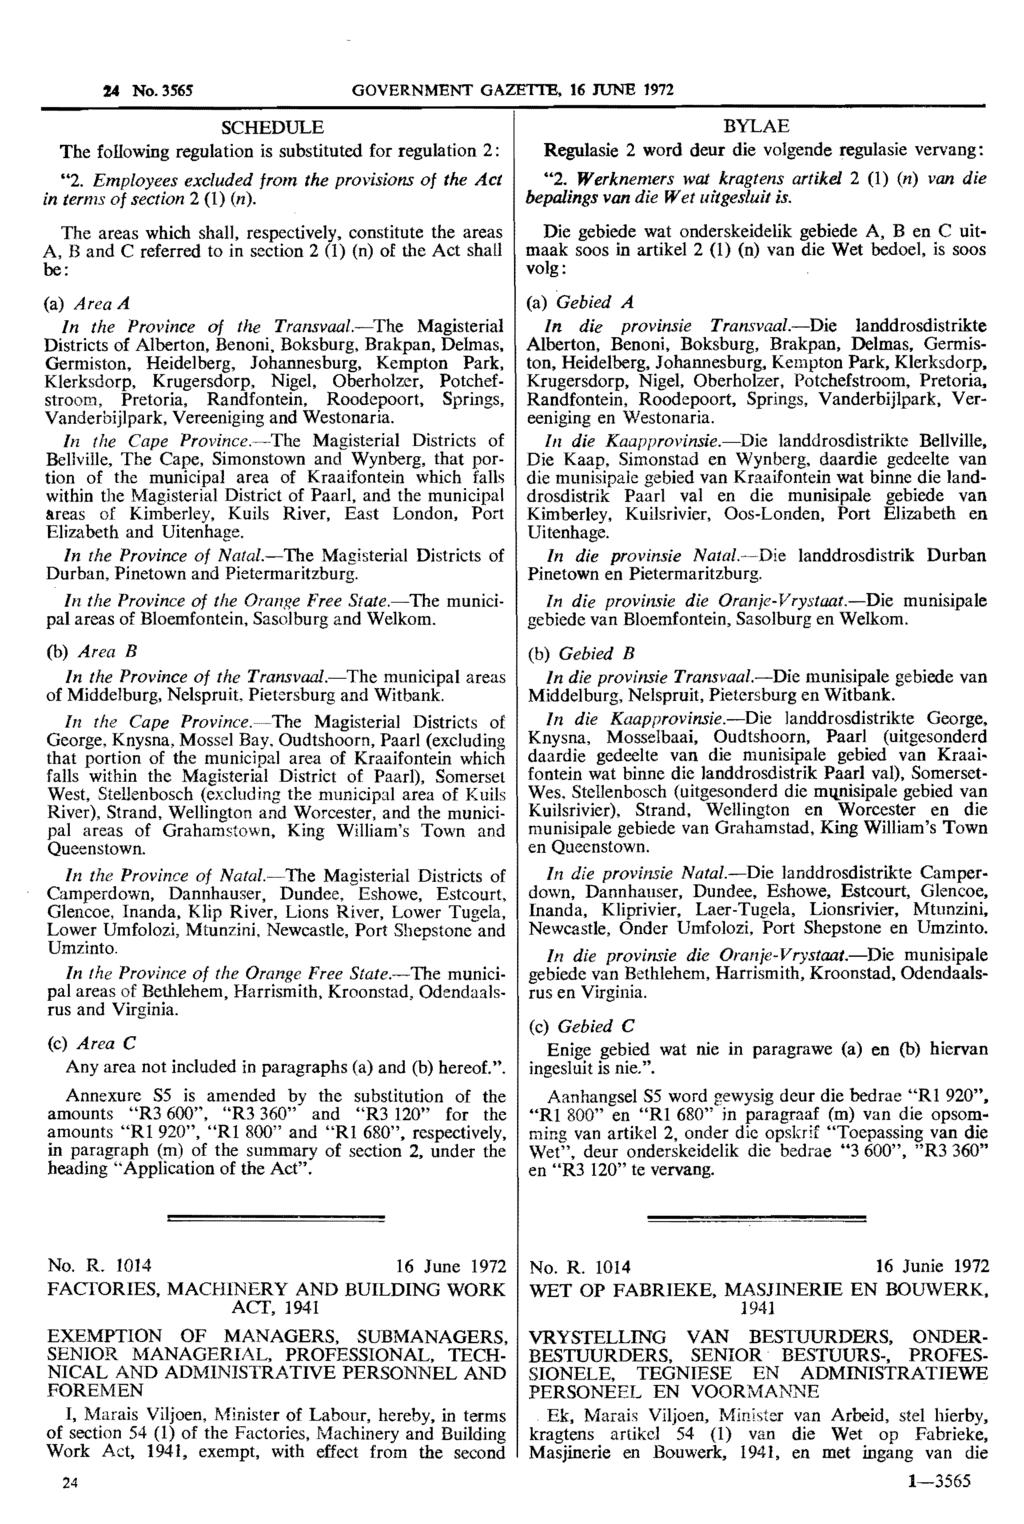 24 No.3S6S GOVERNMENT GAZETTE. 16 JlJN1! 1972 SCHEDULE The following regulation is substituted for regulation 2: "2. Employees excluded from the provisions of the Act in terms of section 2 (1) (n).